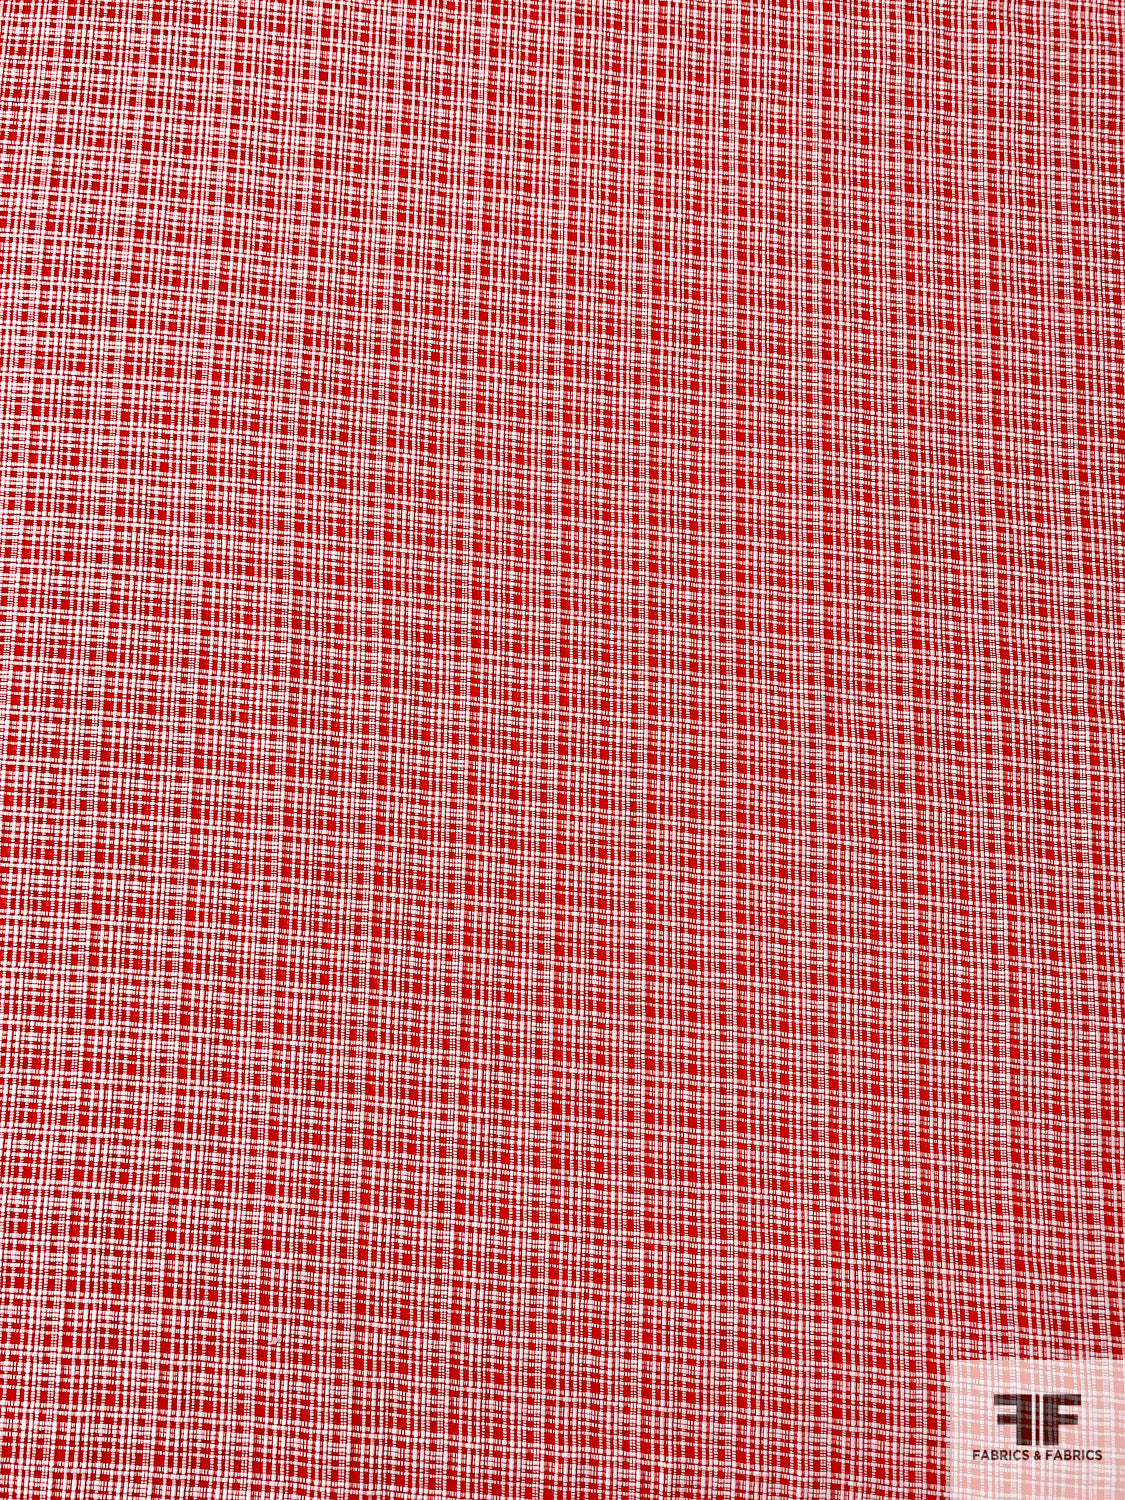 Dense Plaid Ladies Suiting - Red / Off-White